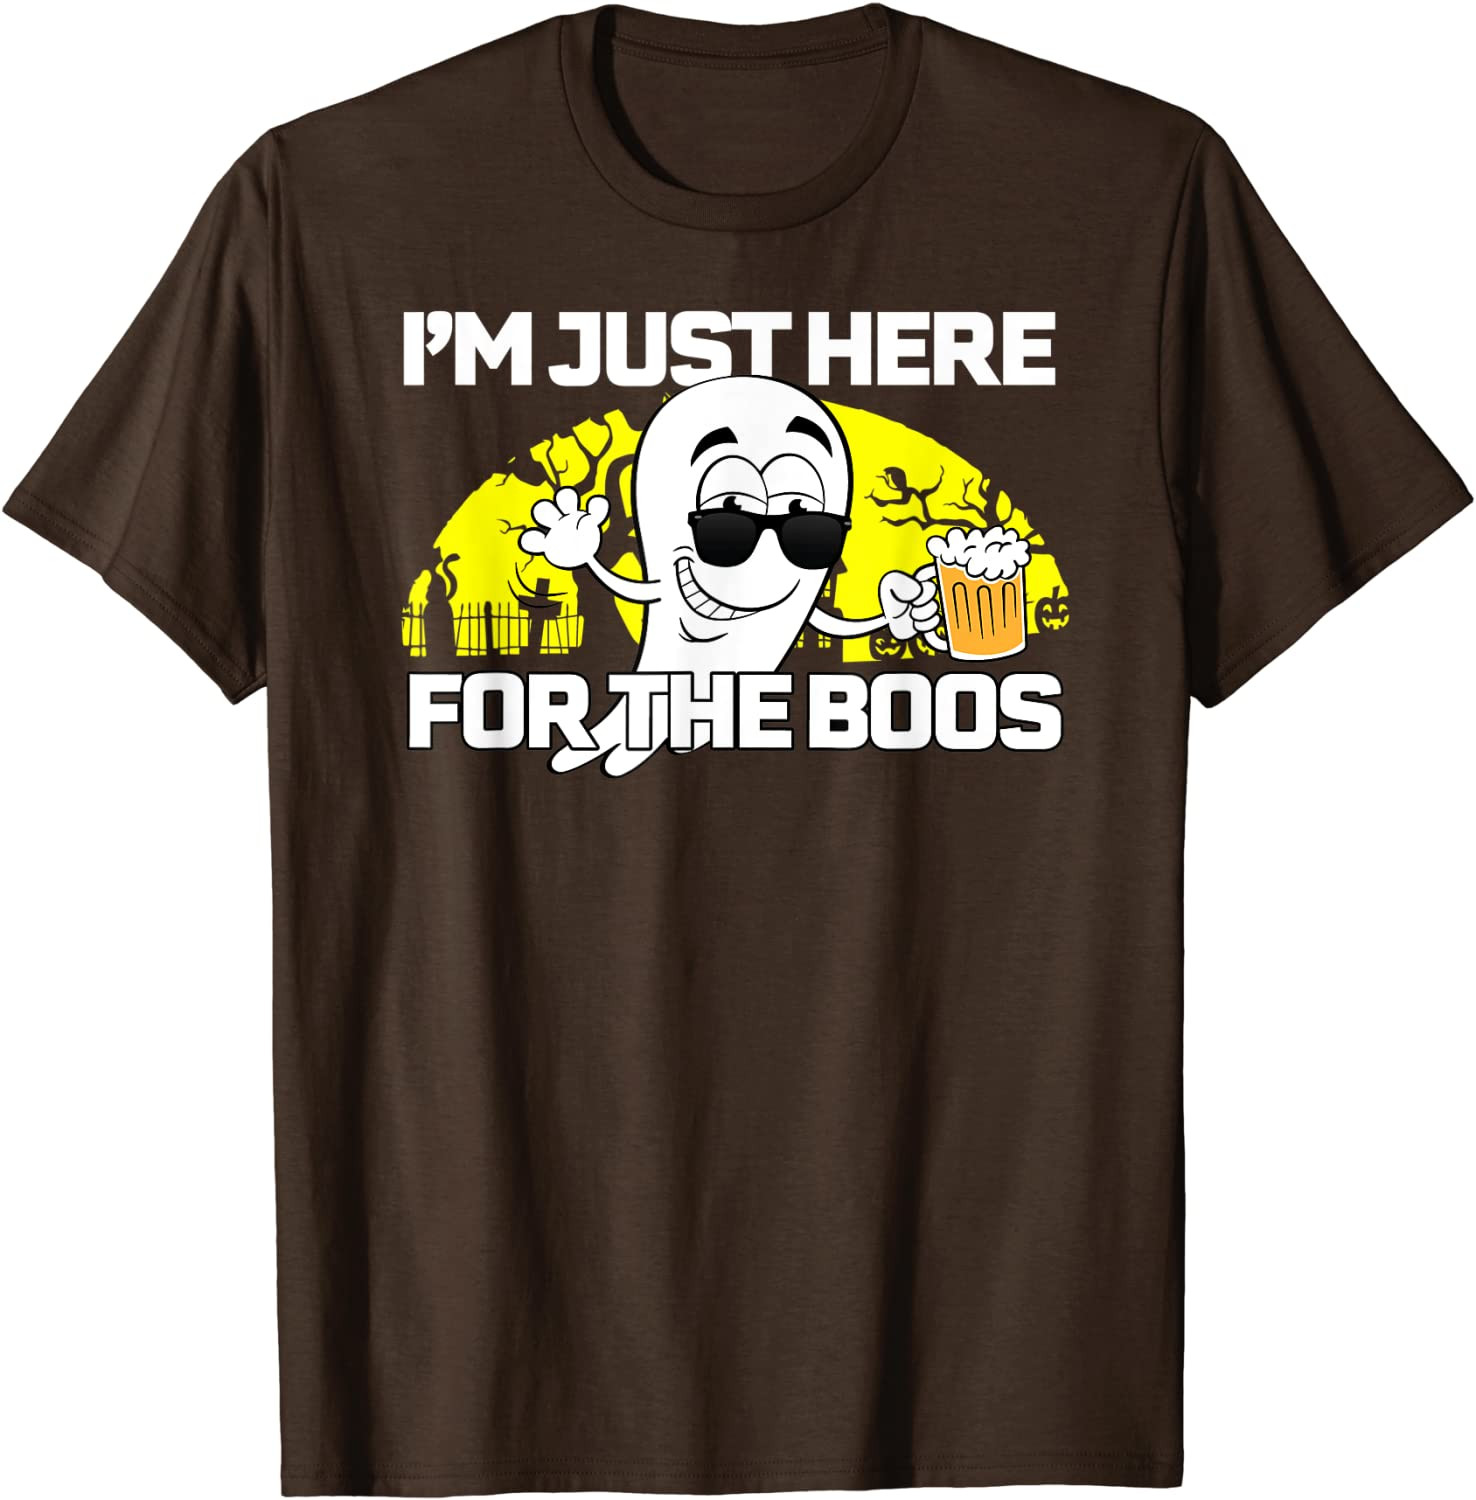 I'm Here For The Boos Ghost Wearing Sunglasses Drinking Beer T-Shirt